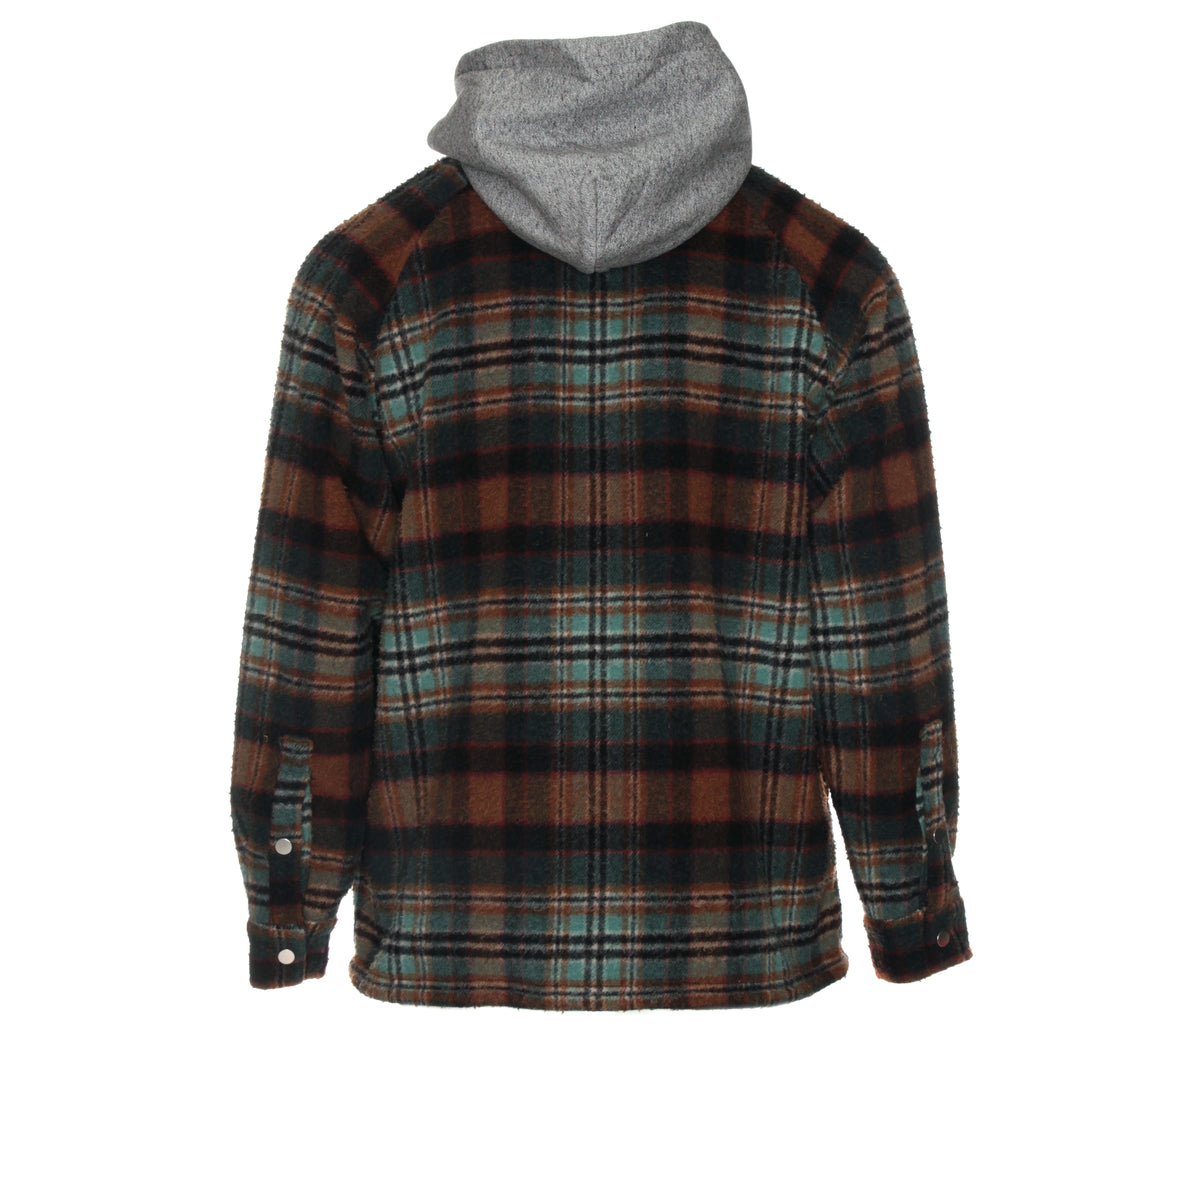 Represent Hooded Flannel Jacket Teal